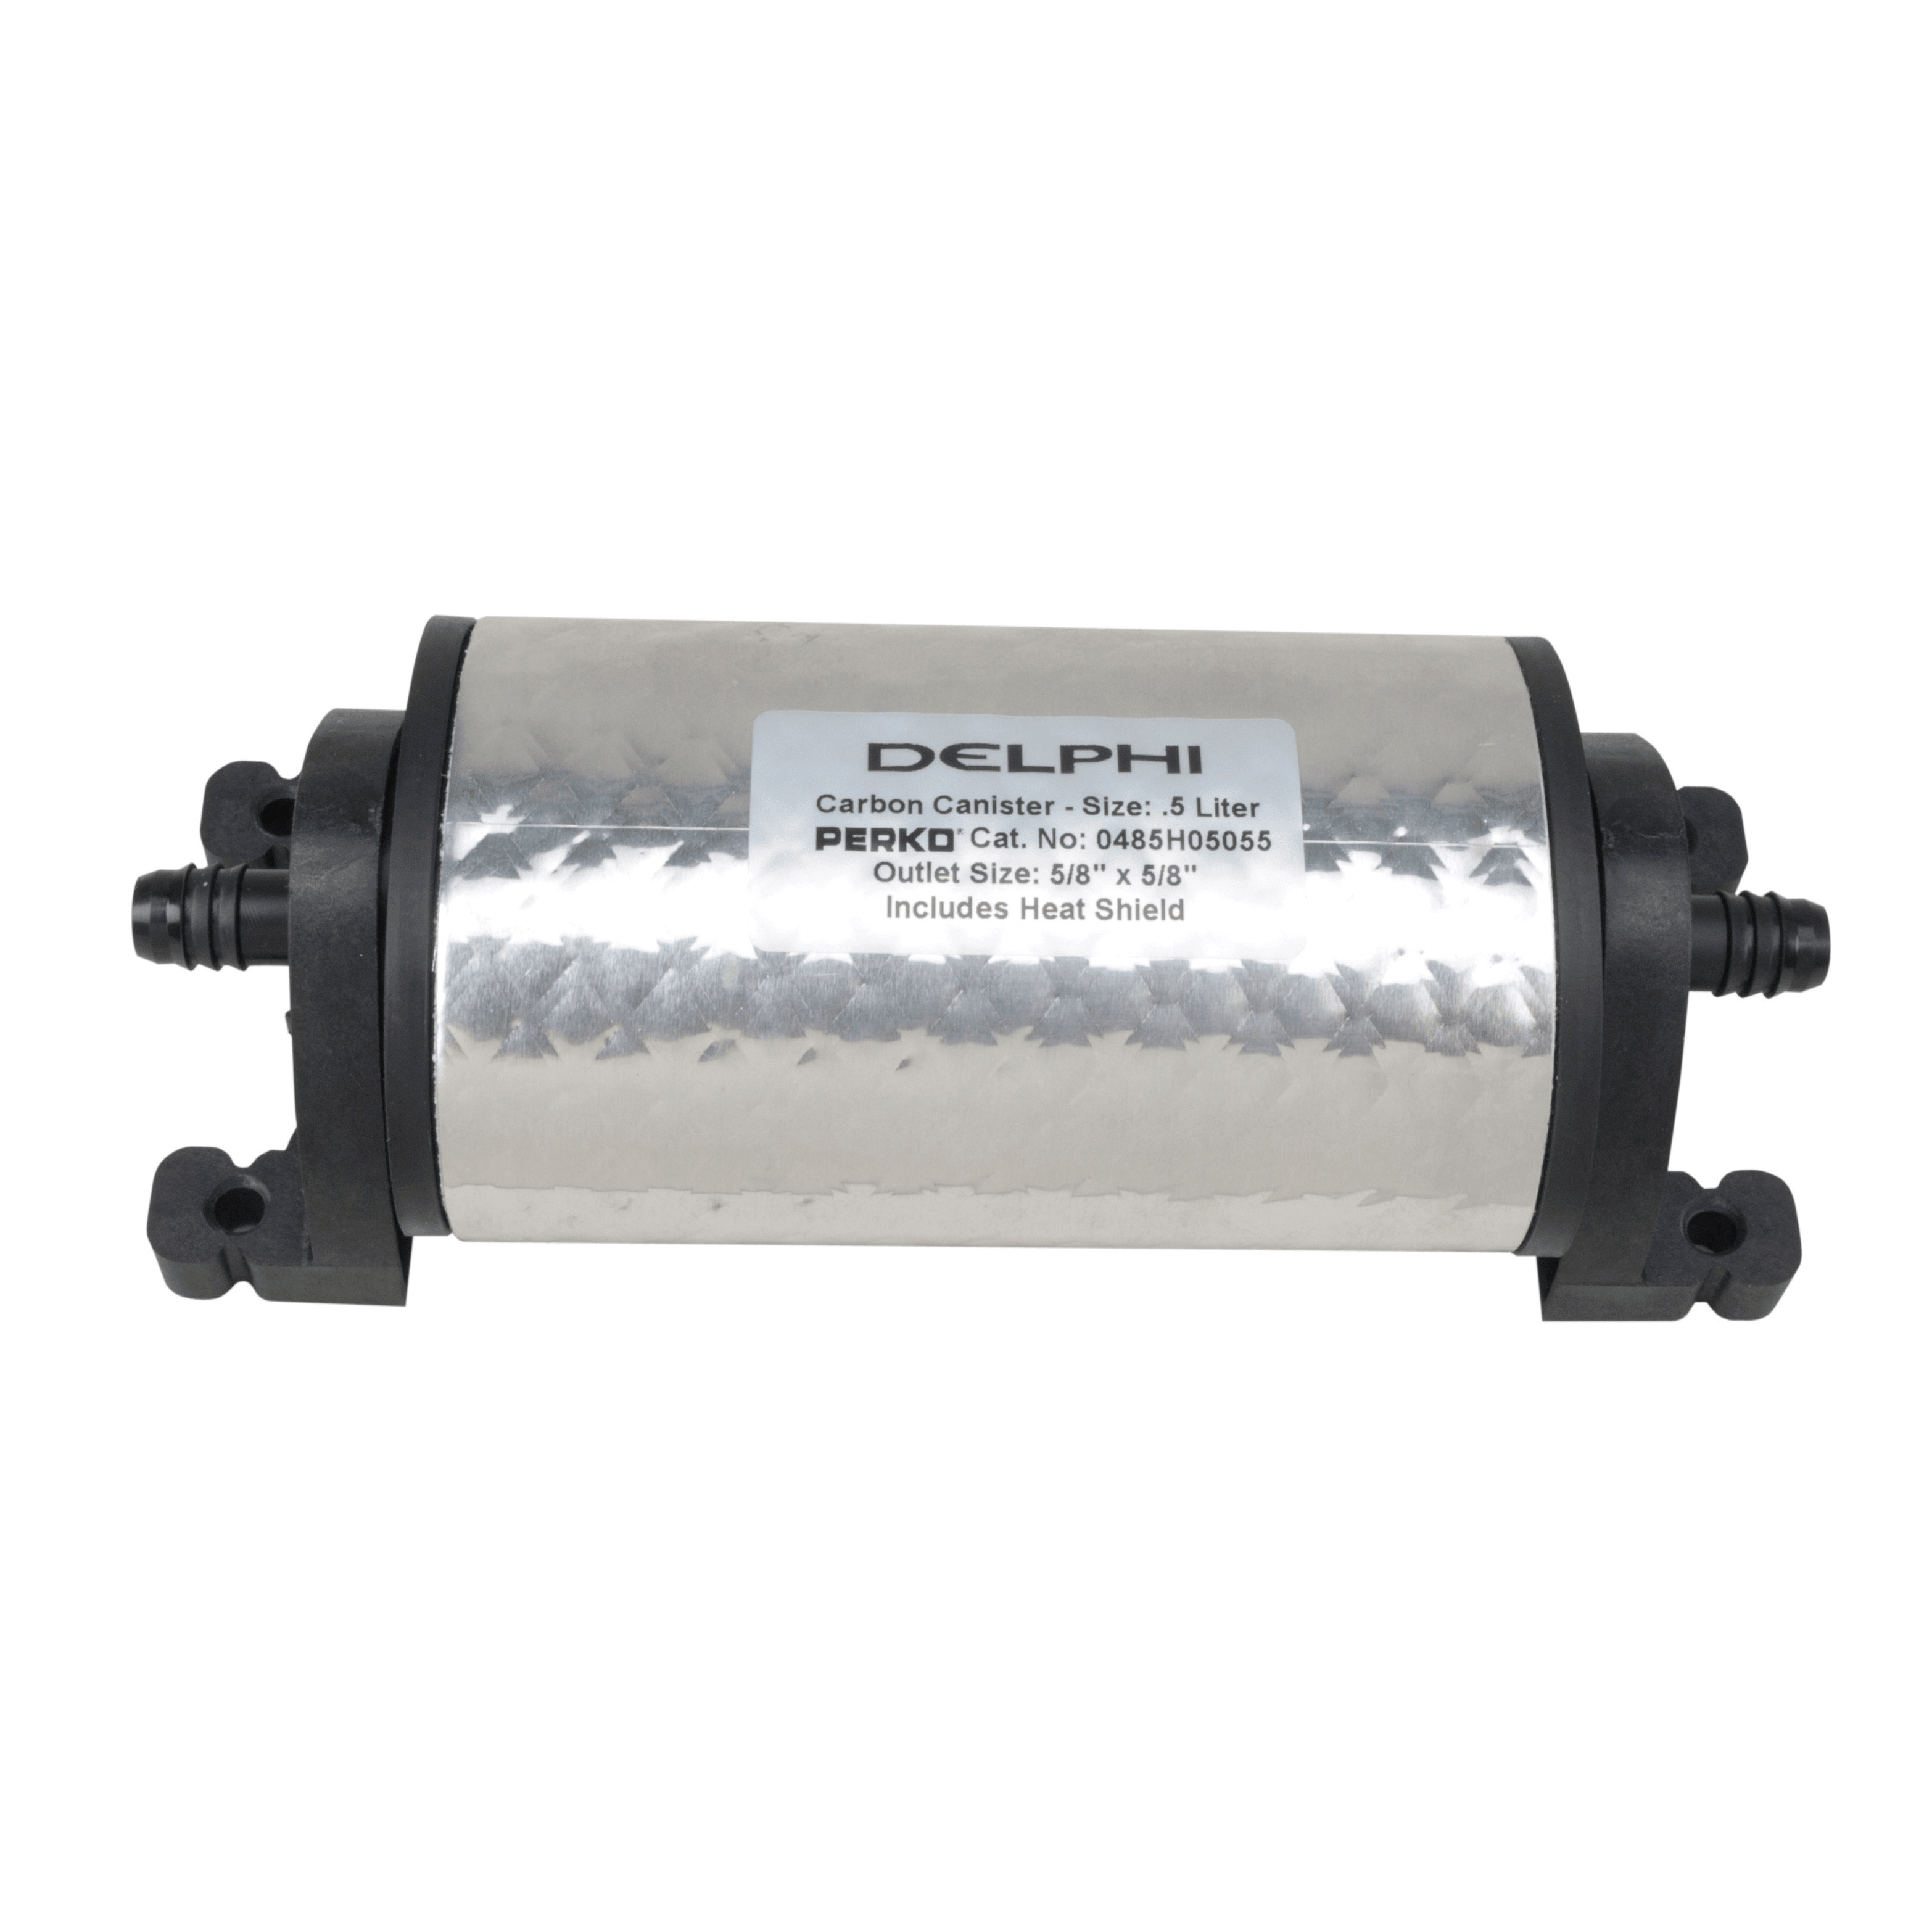 Perko Marine Carbon Canisters - Heat Shield Protected, EPA Compliant